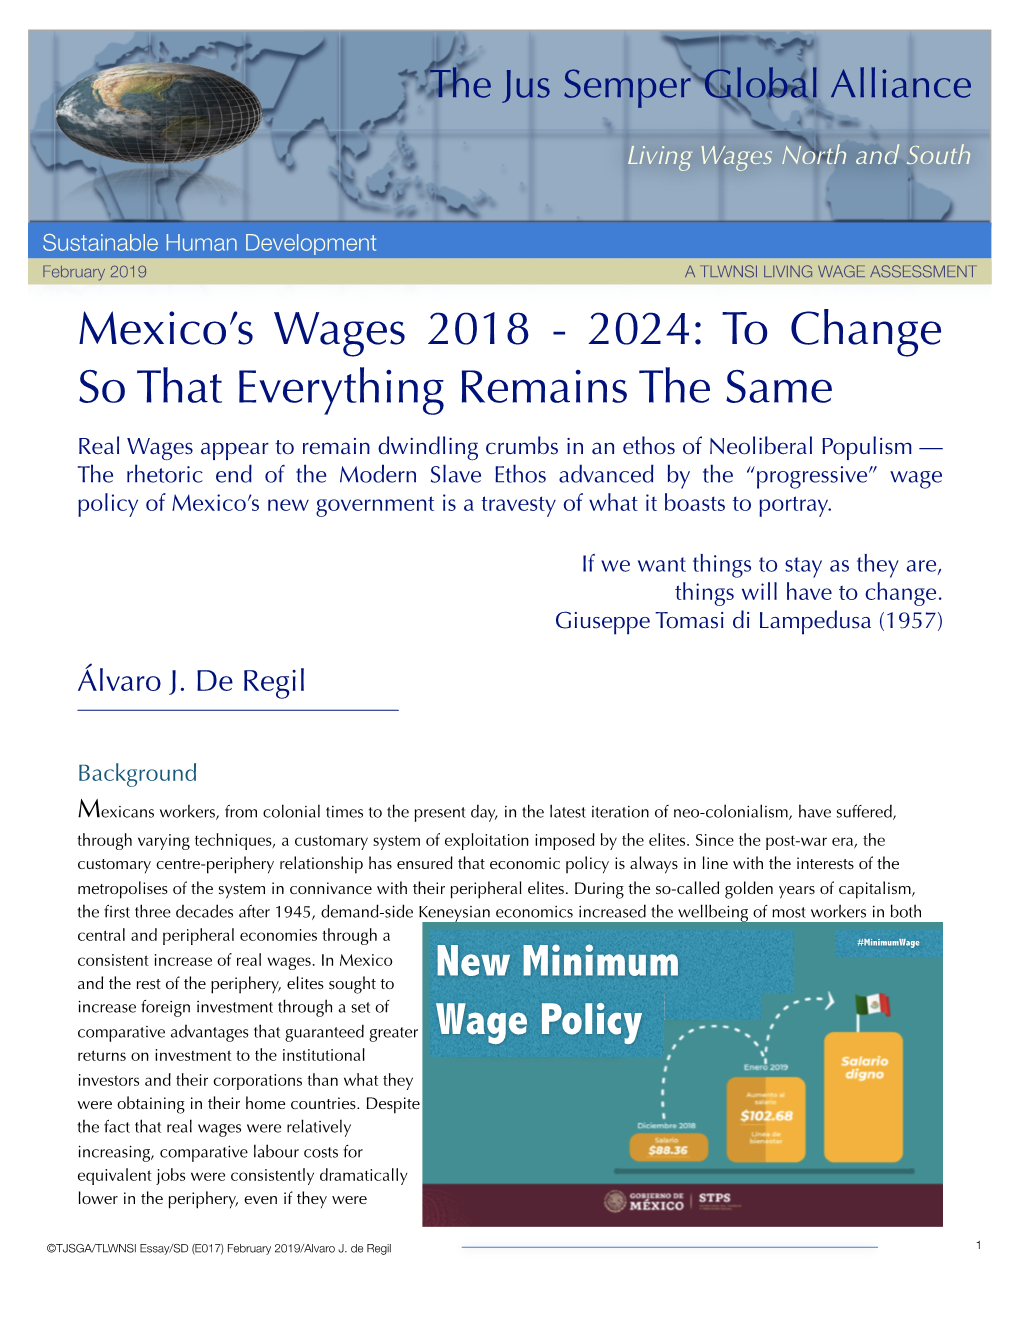 Mexico's Wages 2018